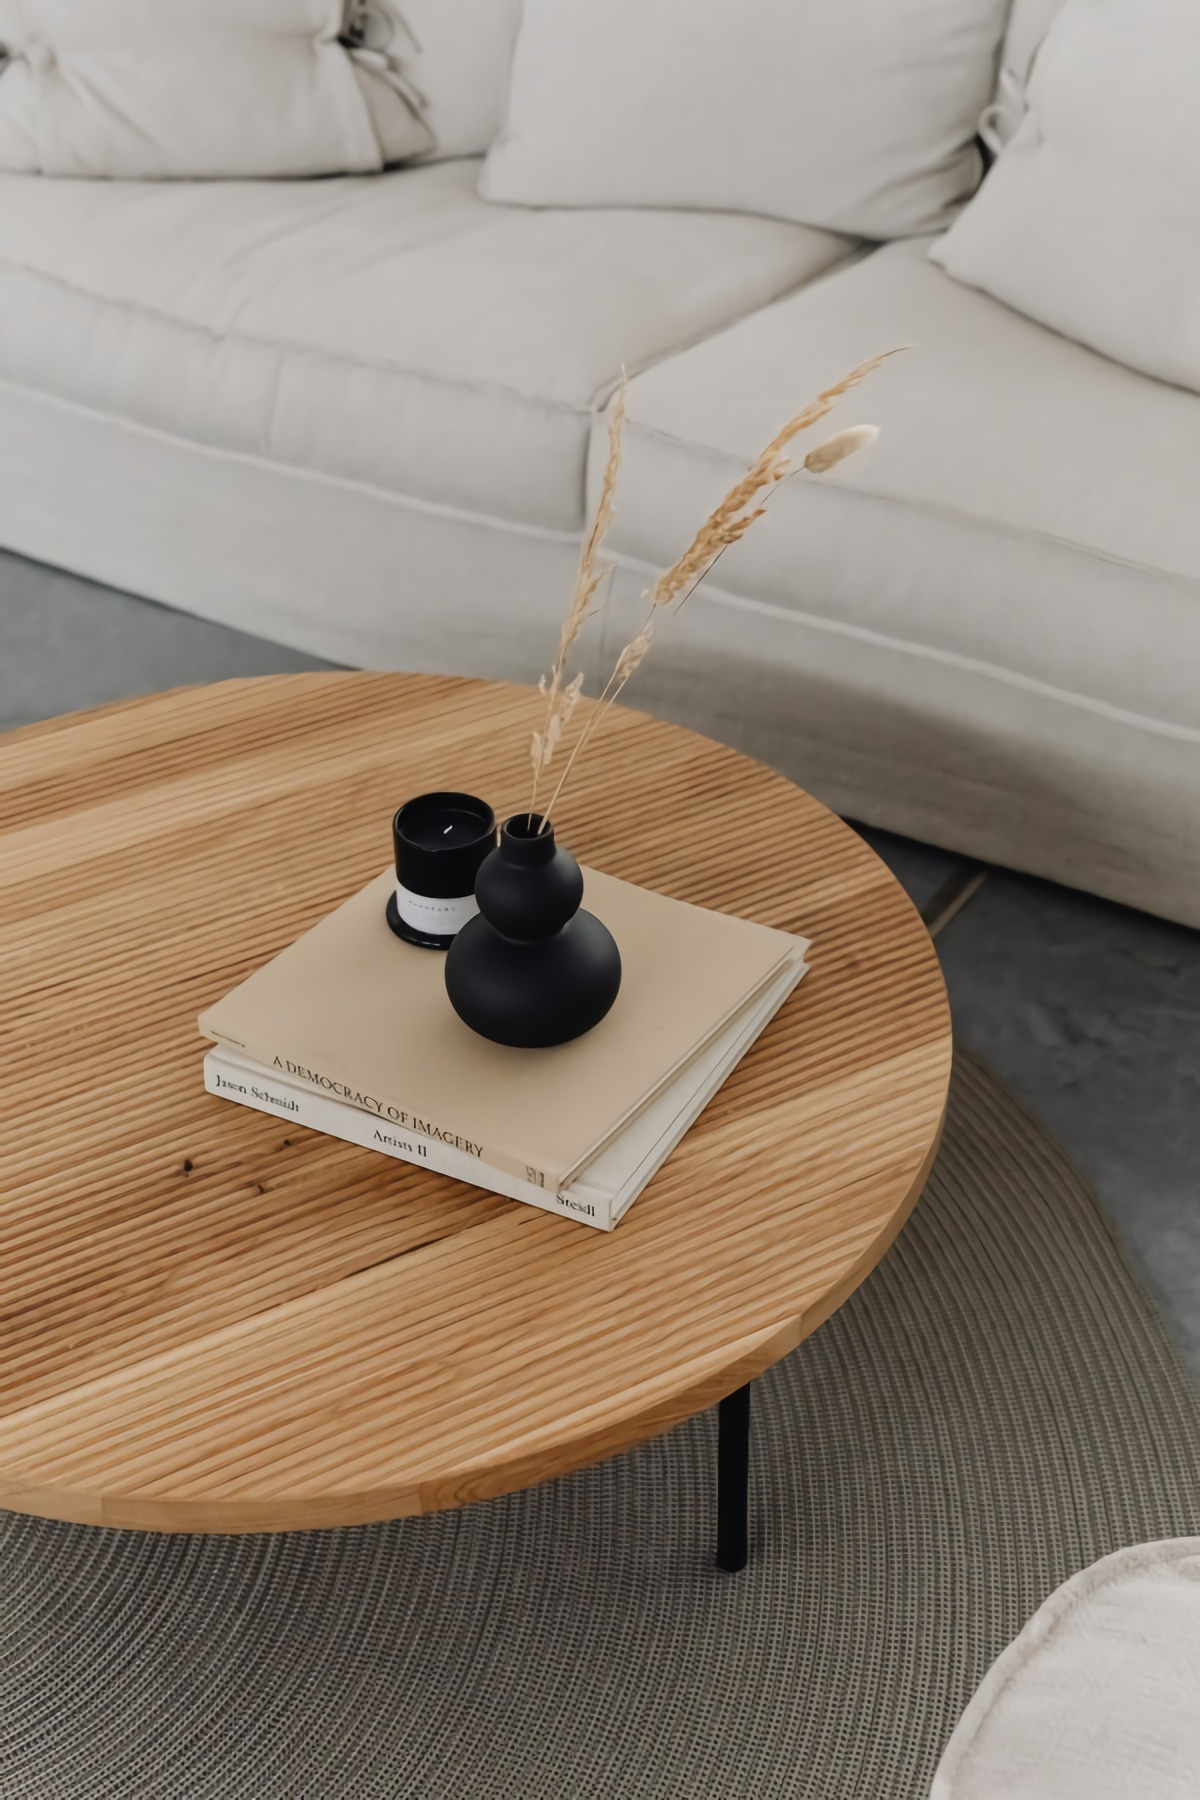 ways to decorate a coffee table tray